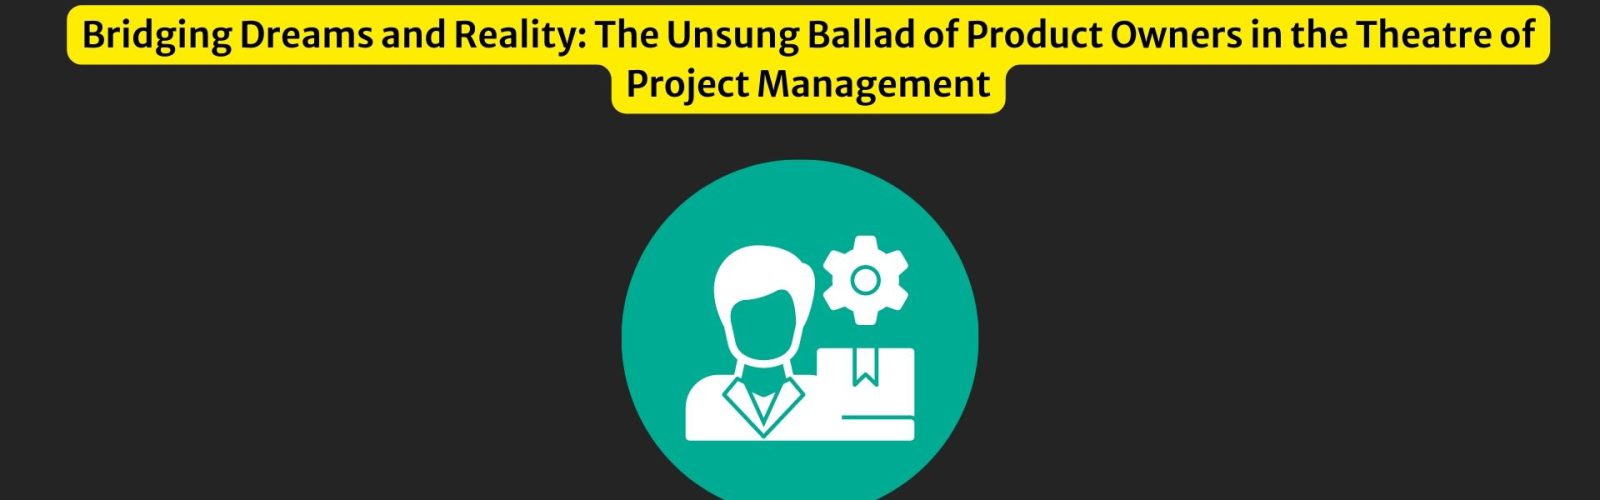 Bridging Dreams and Reality The Unsung Ballad of Product Owners in the Theatre of Project Management